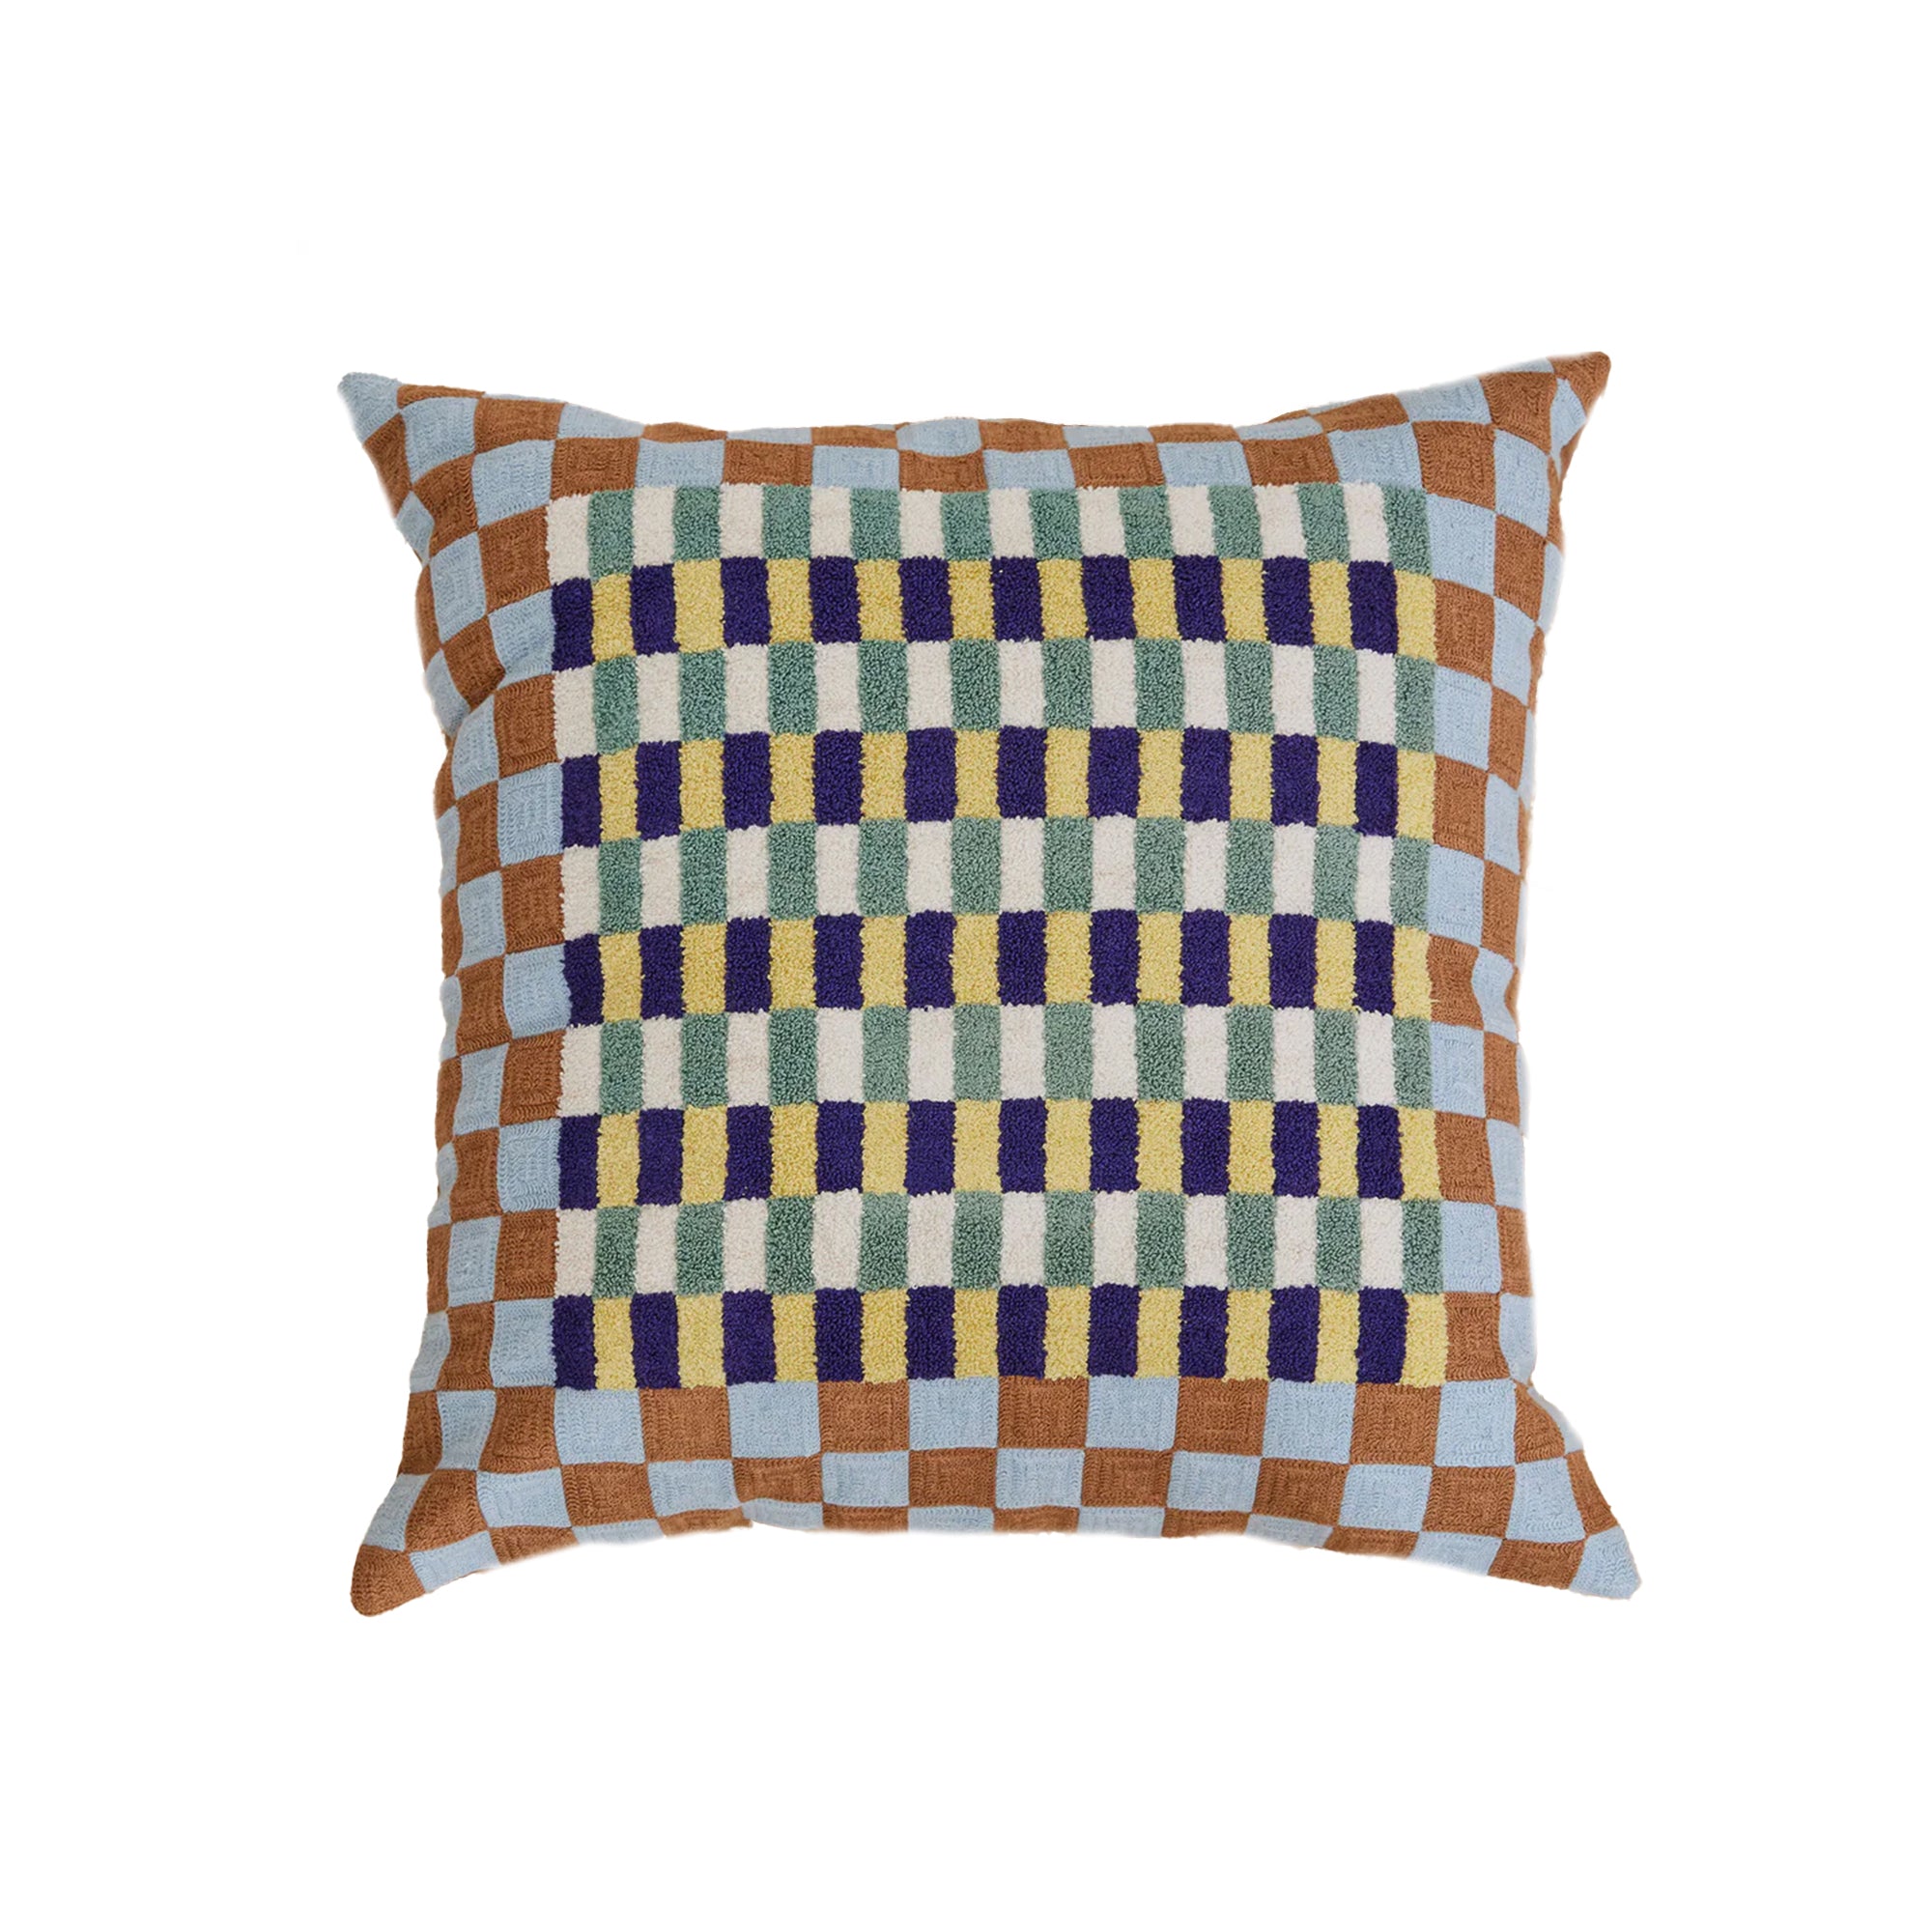 Basket Cushion Cover with Pillow Insert